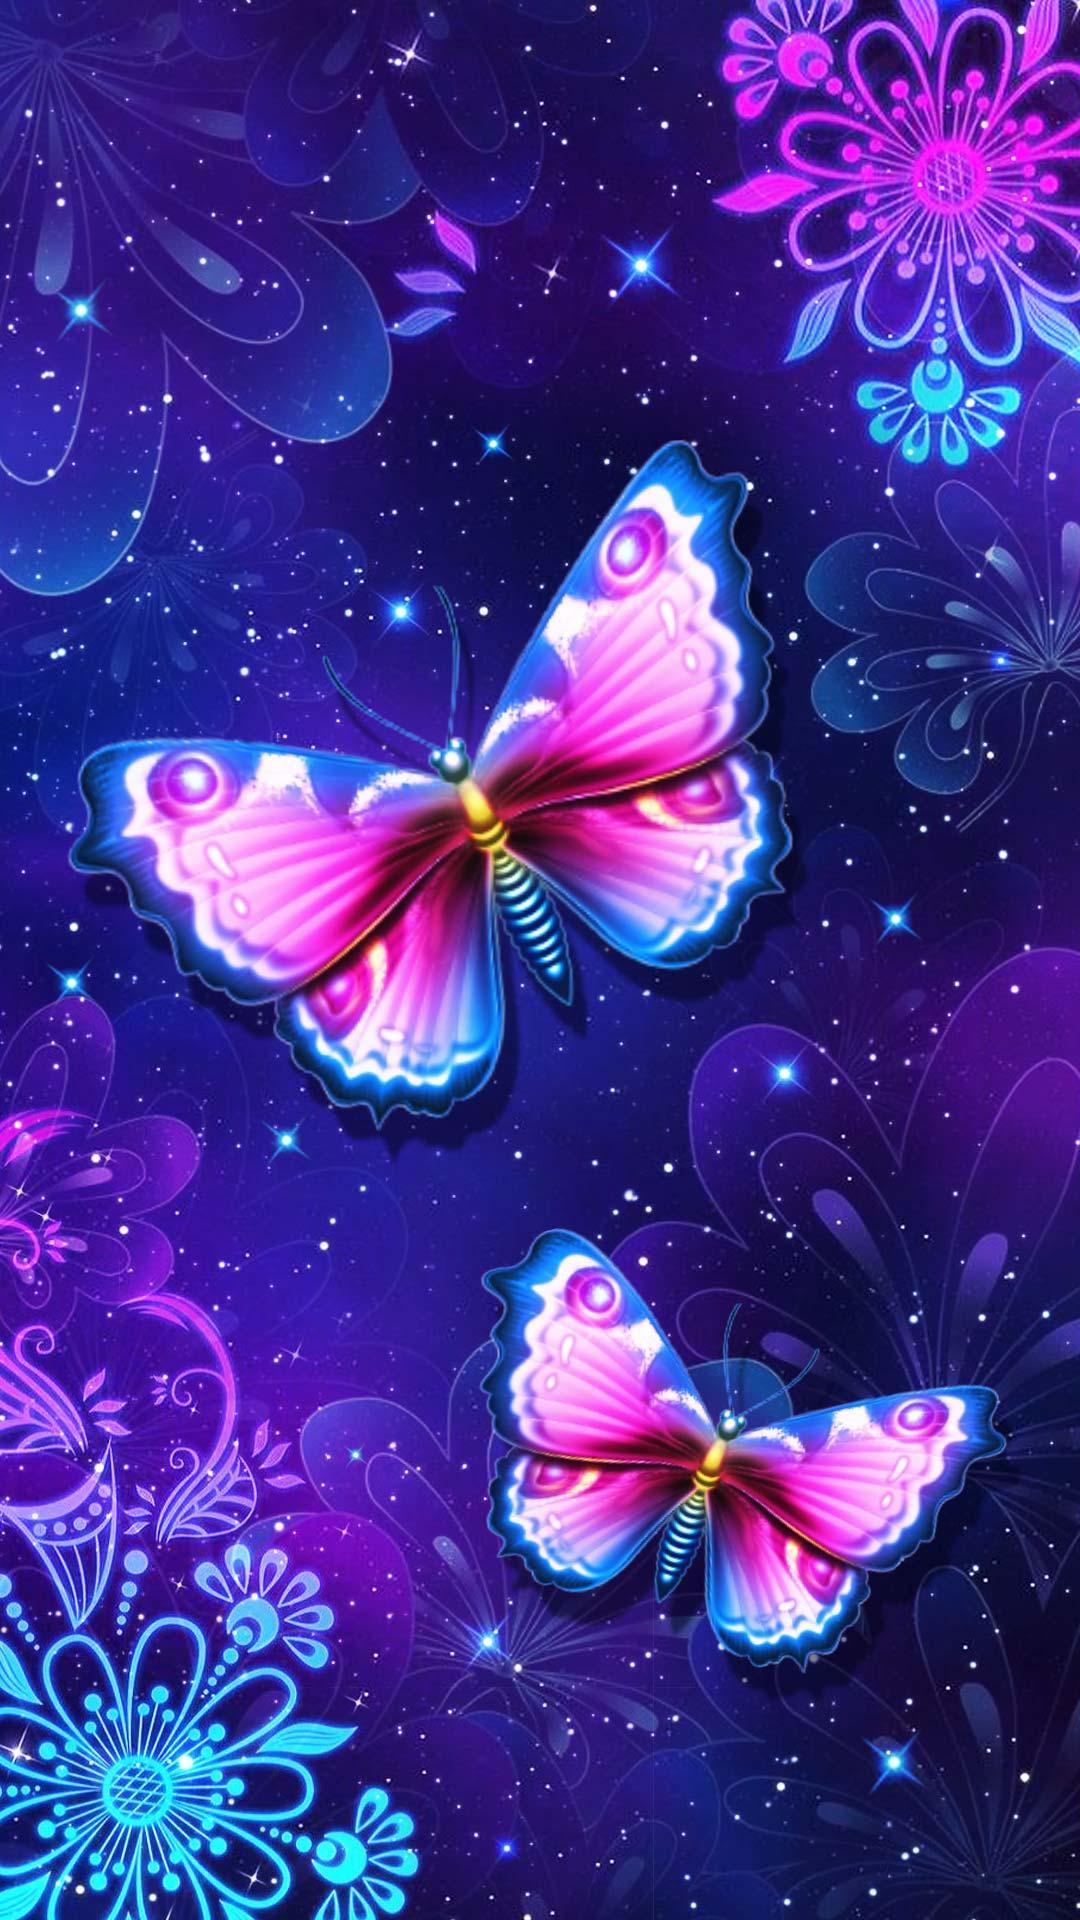 Purple Butterfly Live Wallpaper for Android - APK Download